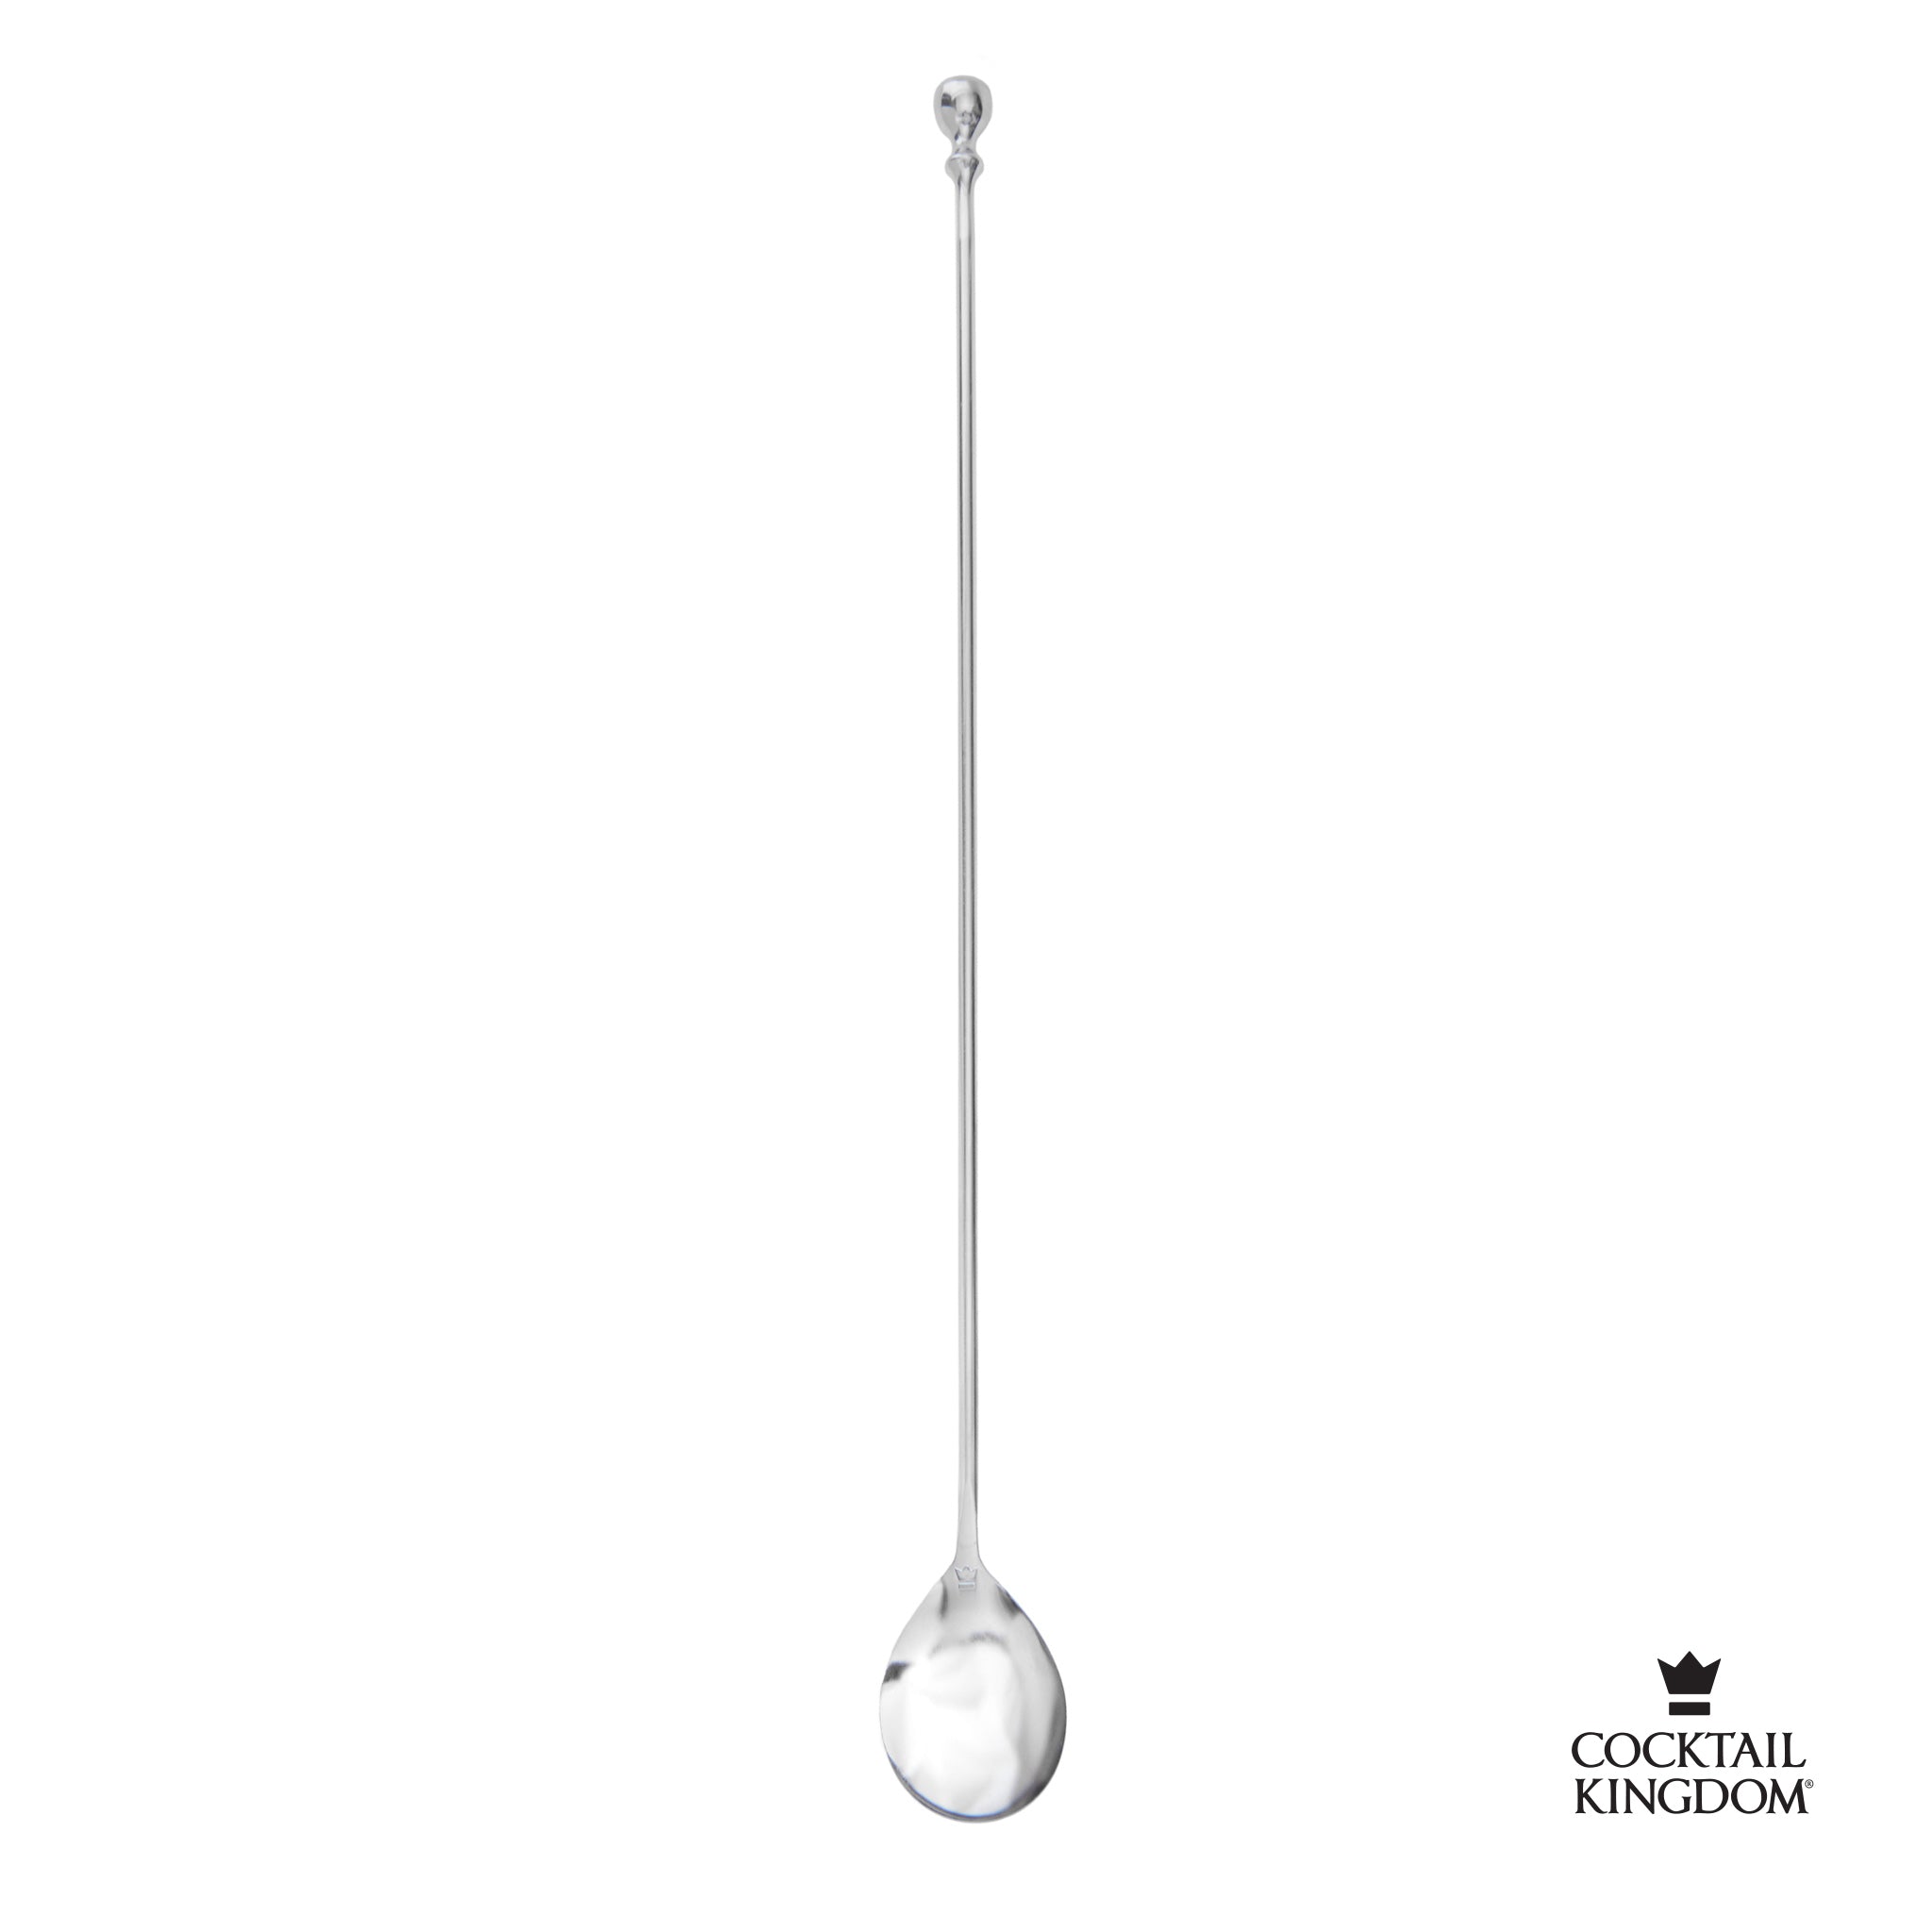 Leopold® Barspoon - Stainless Steel / 36cm